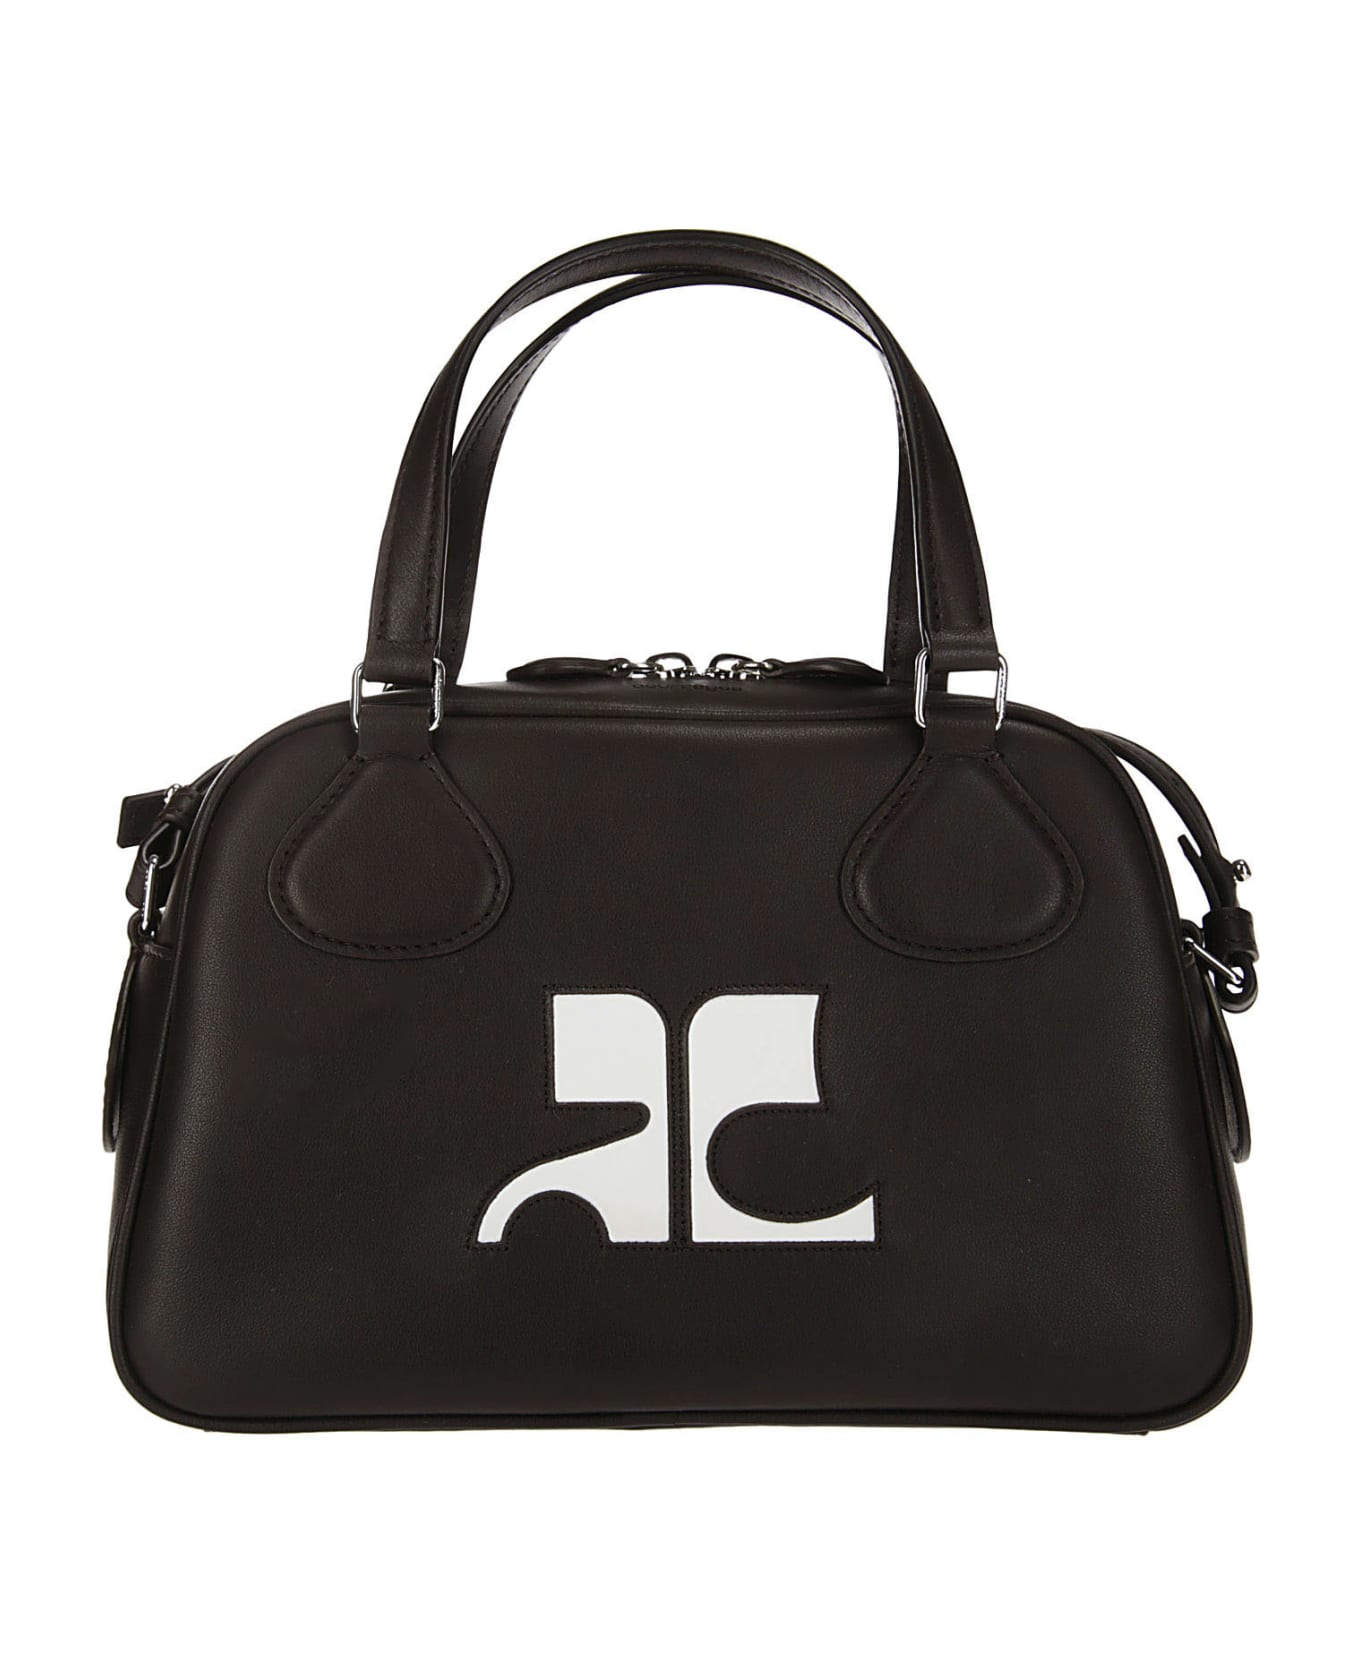 Courrèges Reedition Bowling Bag - CHOCOLATE 